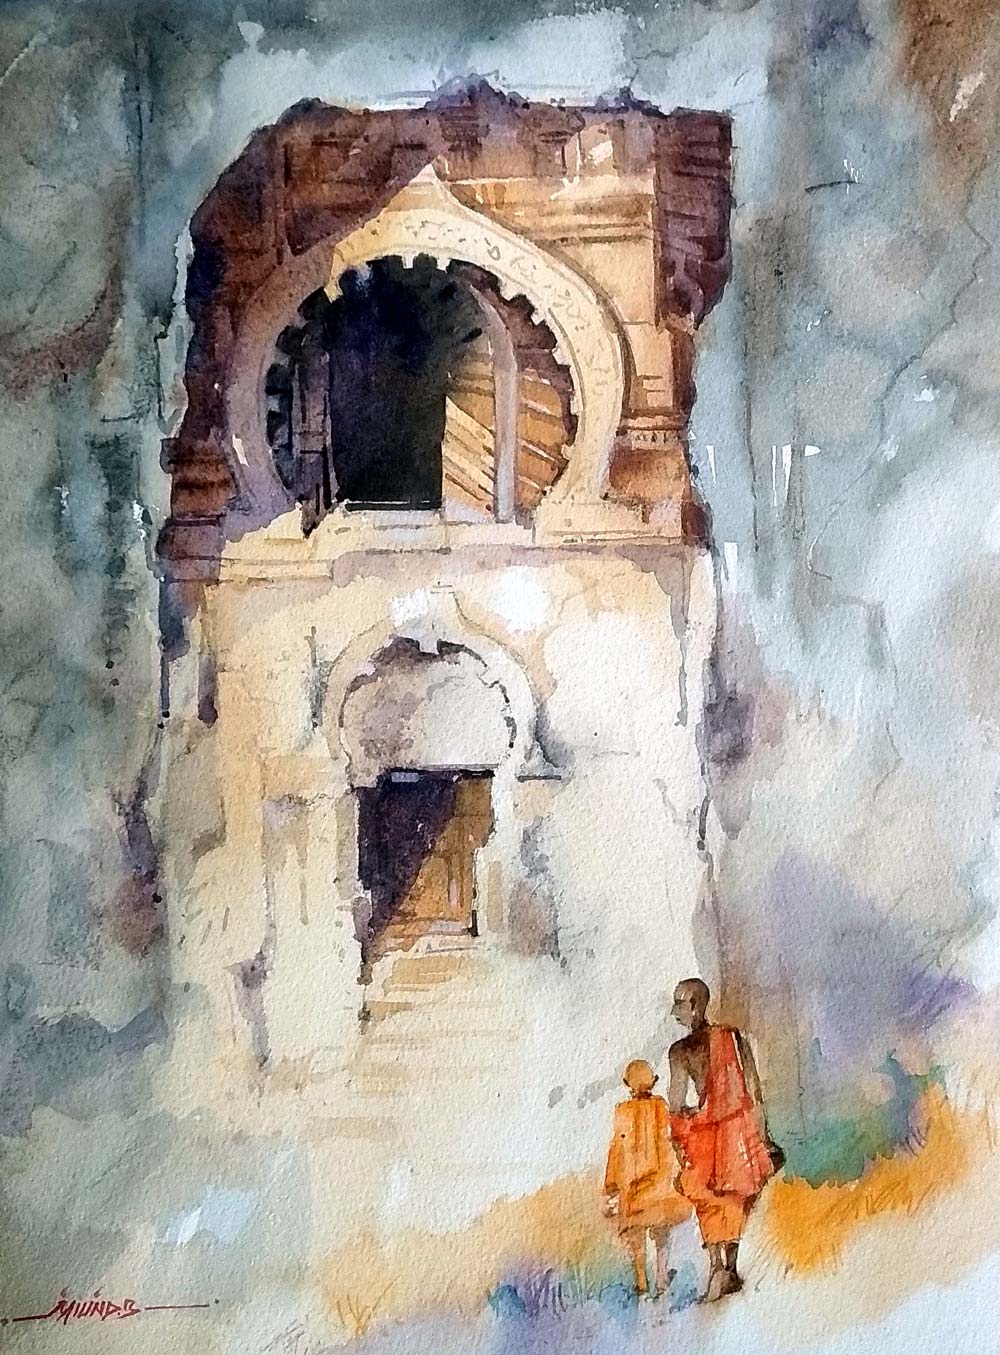 Figurative Painting with Watercolor on Paper "Buddhas Way (Suleman Caves)" art by Milind Bhanji